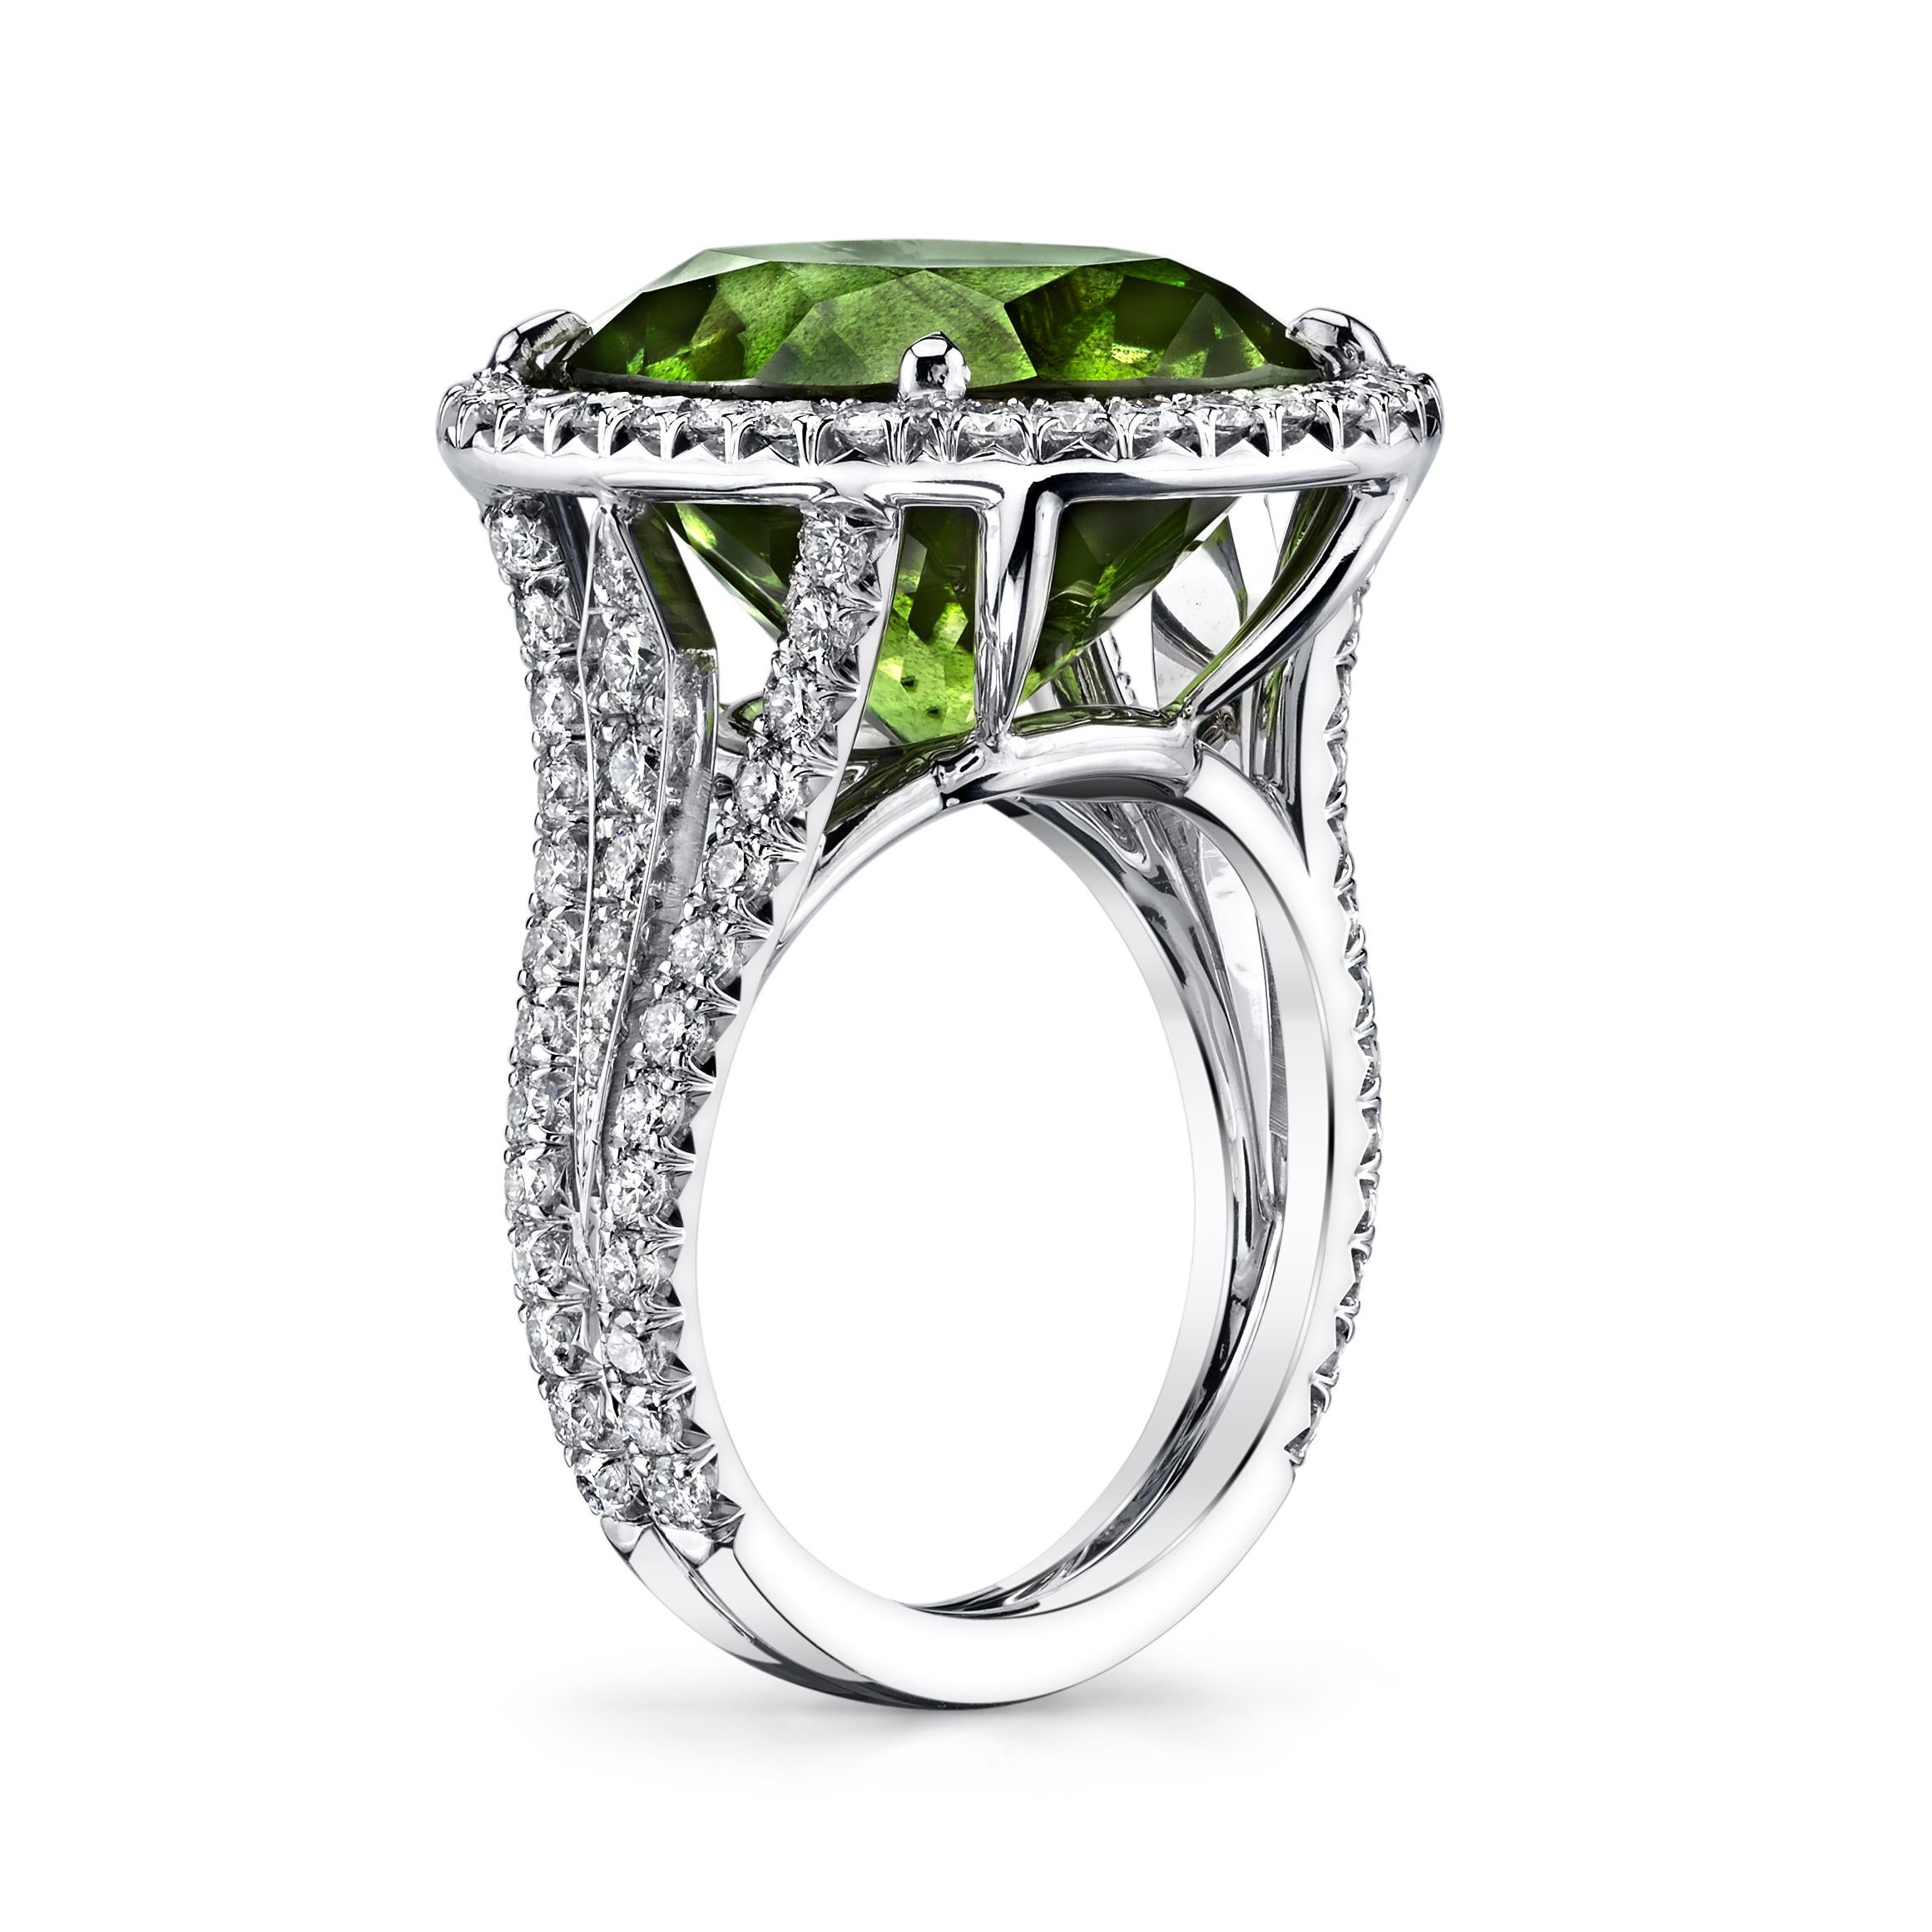 Oval Cut 16.16ct Burmese Peridot Ring Adorned with 1.15ct Diamonds and Set in 18 KW